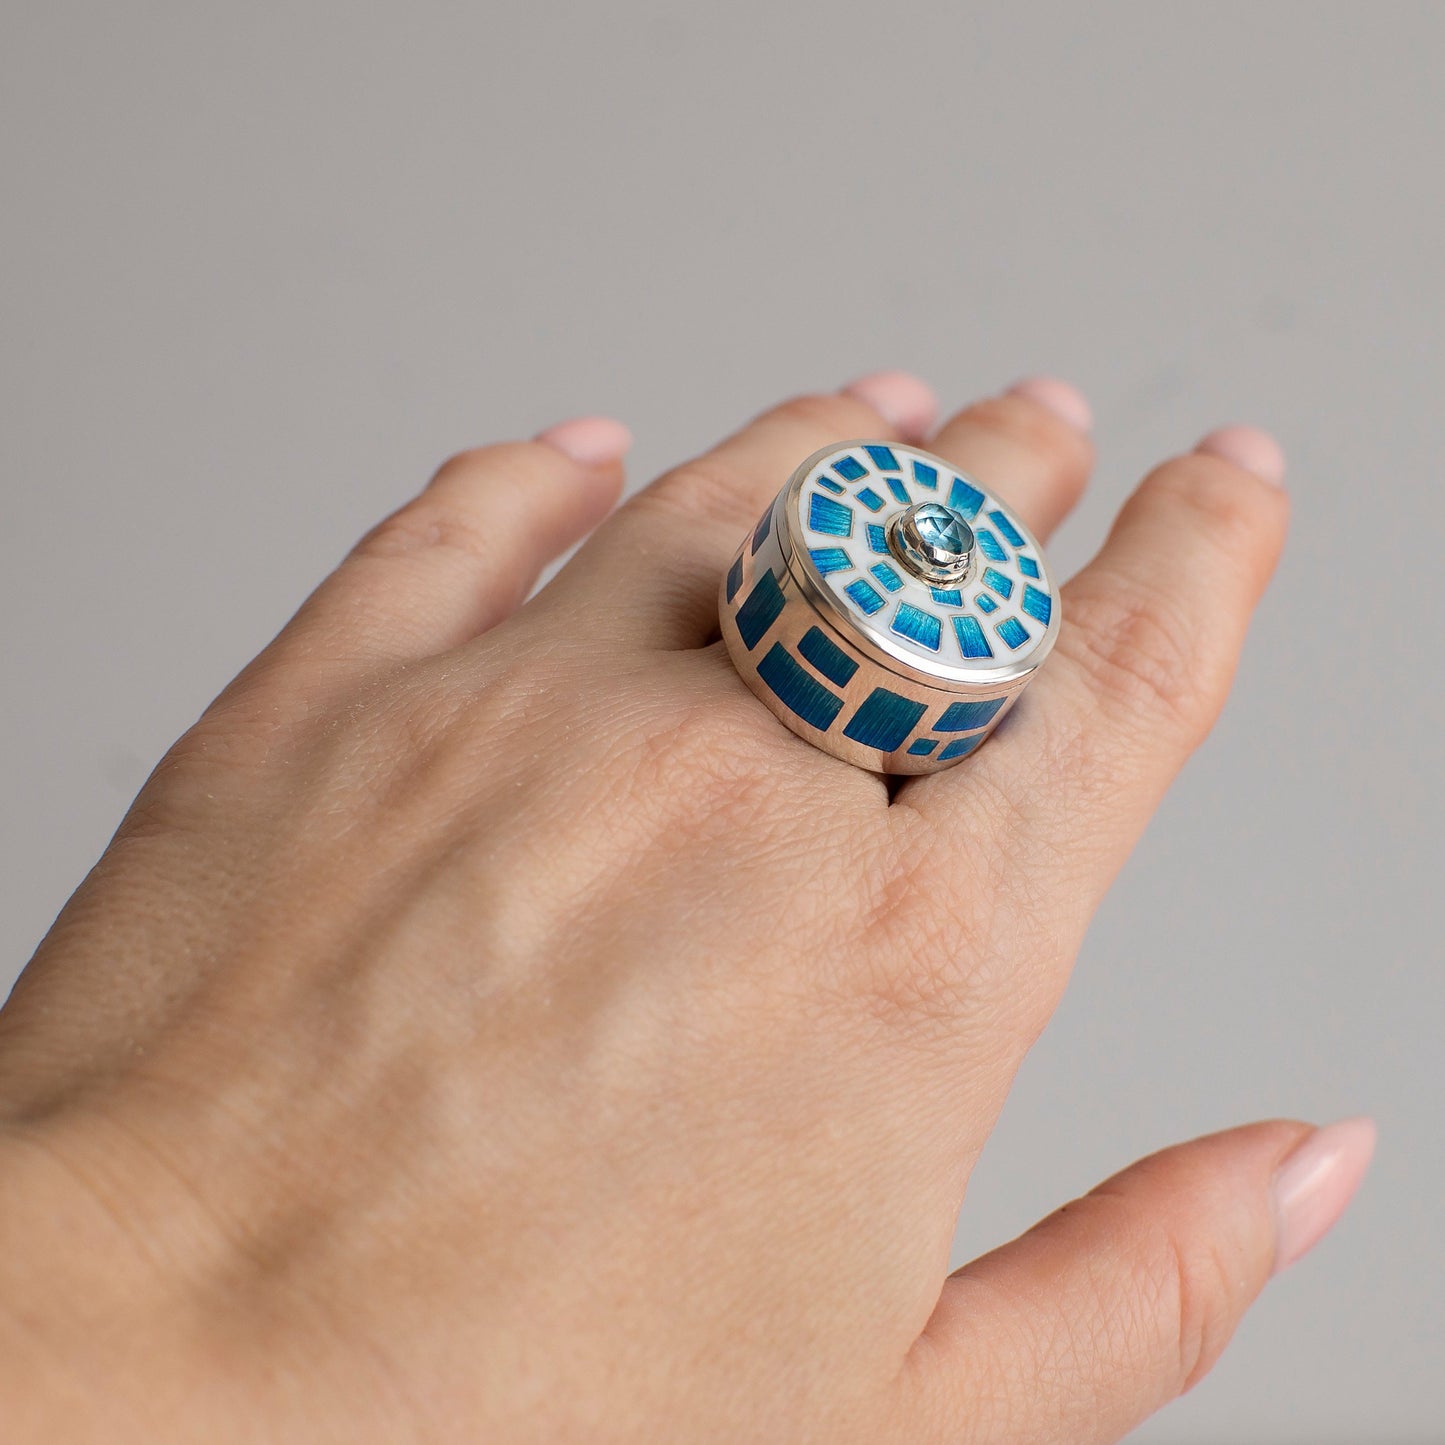 Pillbox or Poison Ring, Enamel Ring With Topaz